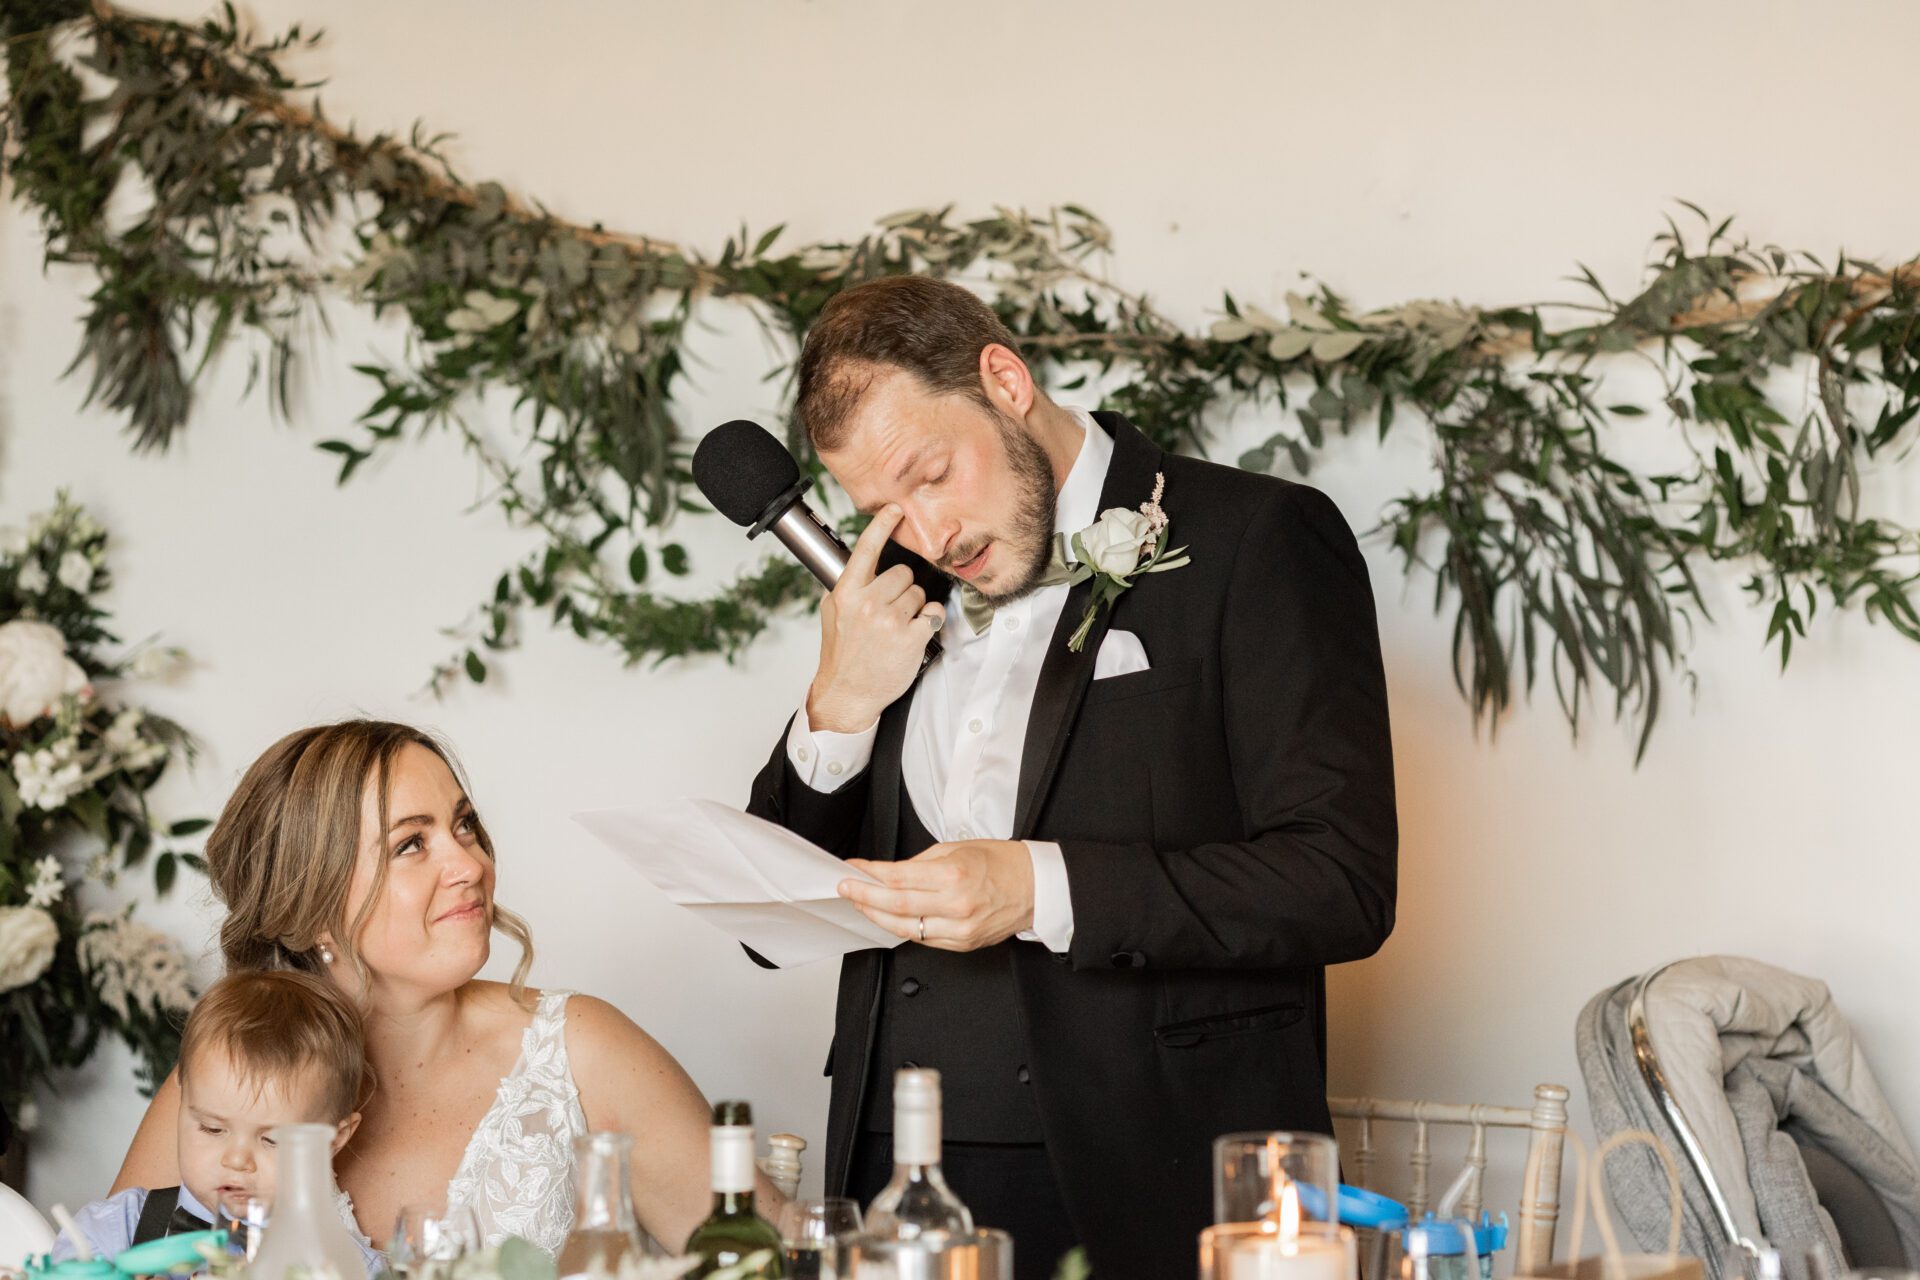 The groom sheds a tear during his speech at Old Luxters Barn wedding venue in Oxfordshire